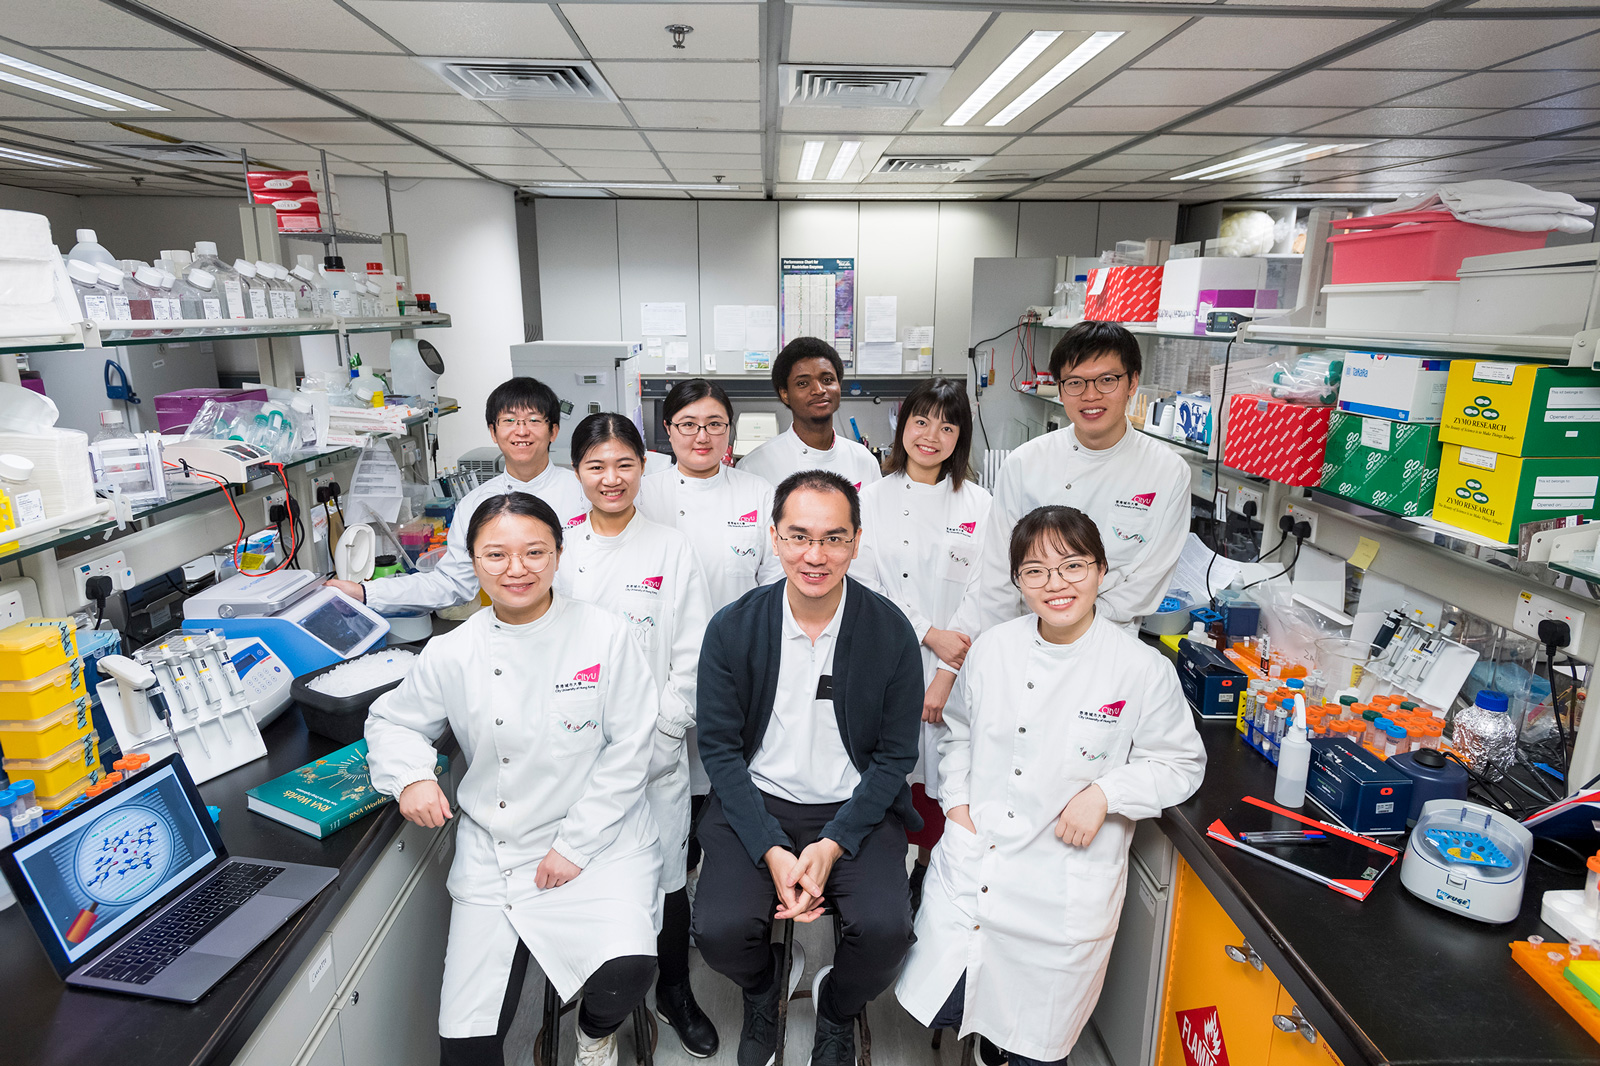 Dr Kwok Chun-kit (middle in front row) and his research team.